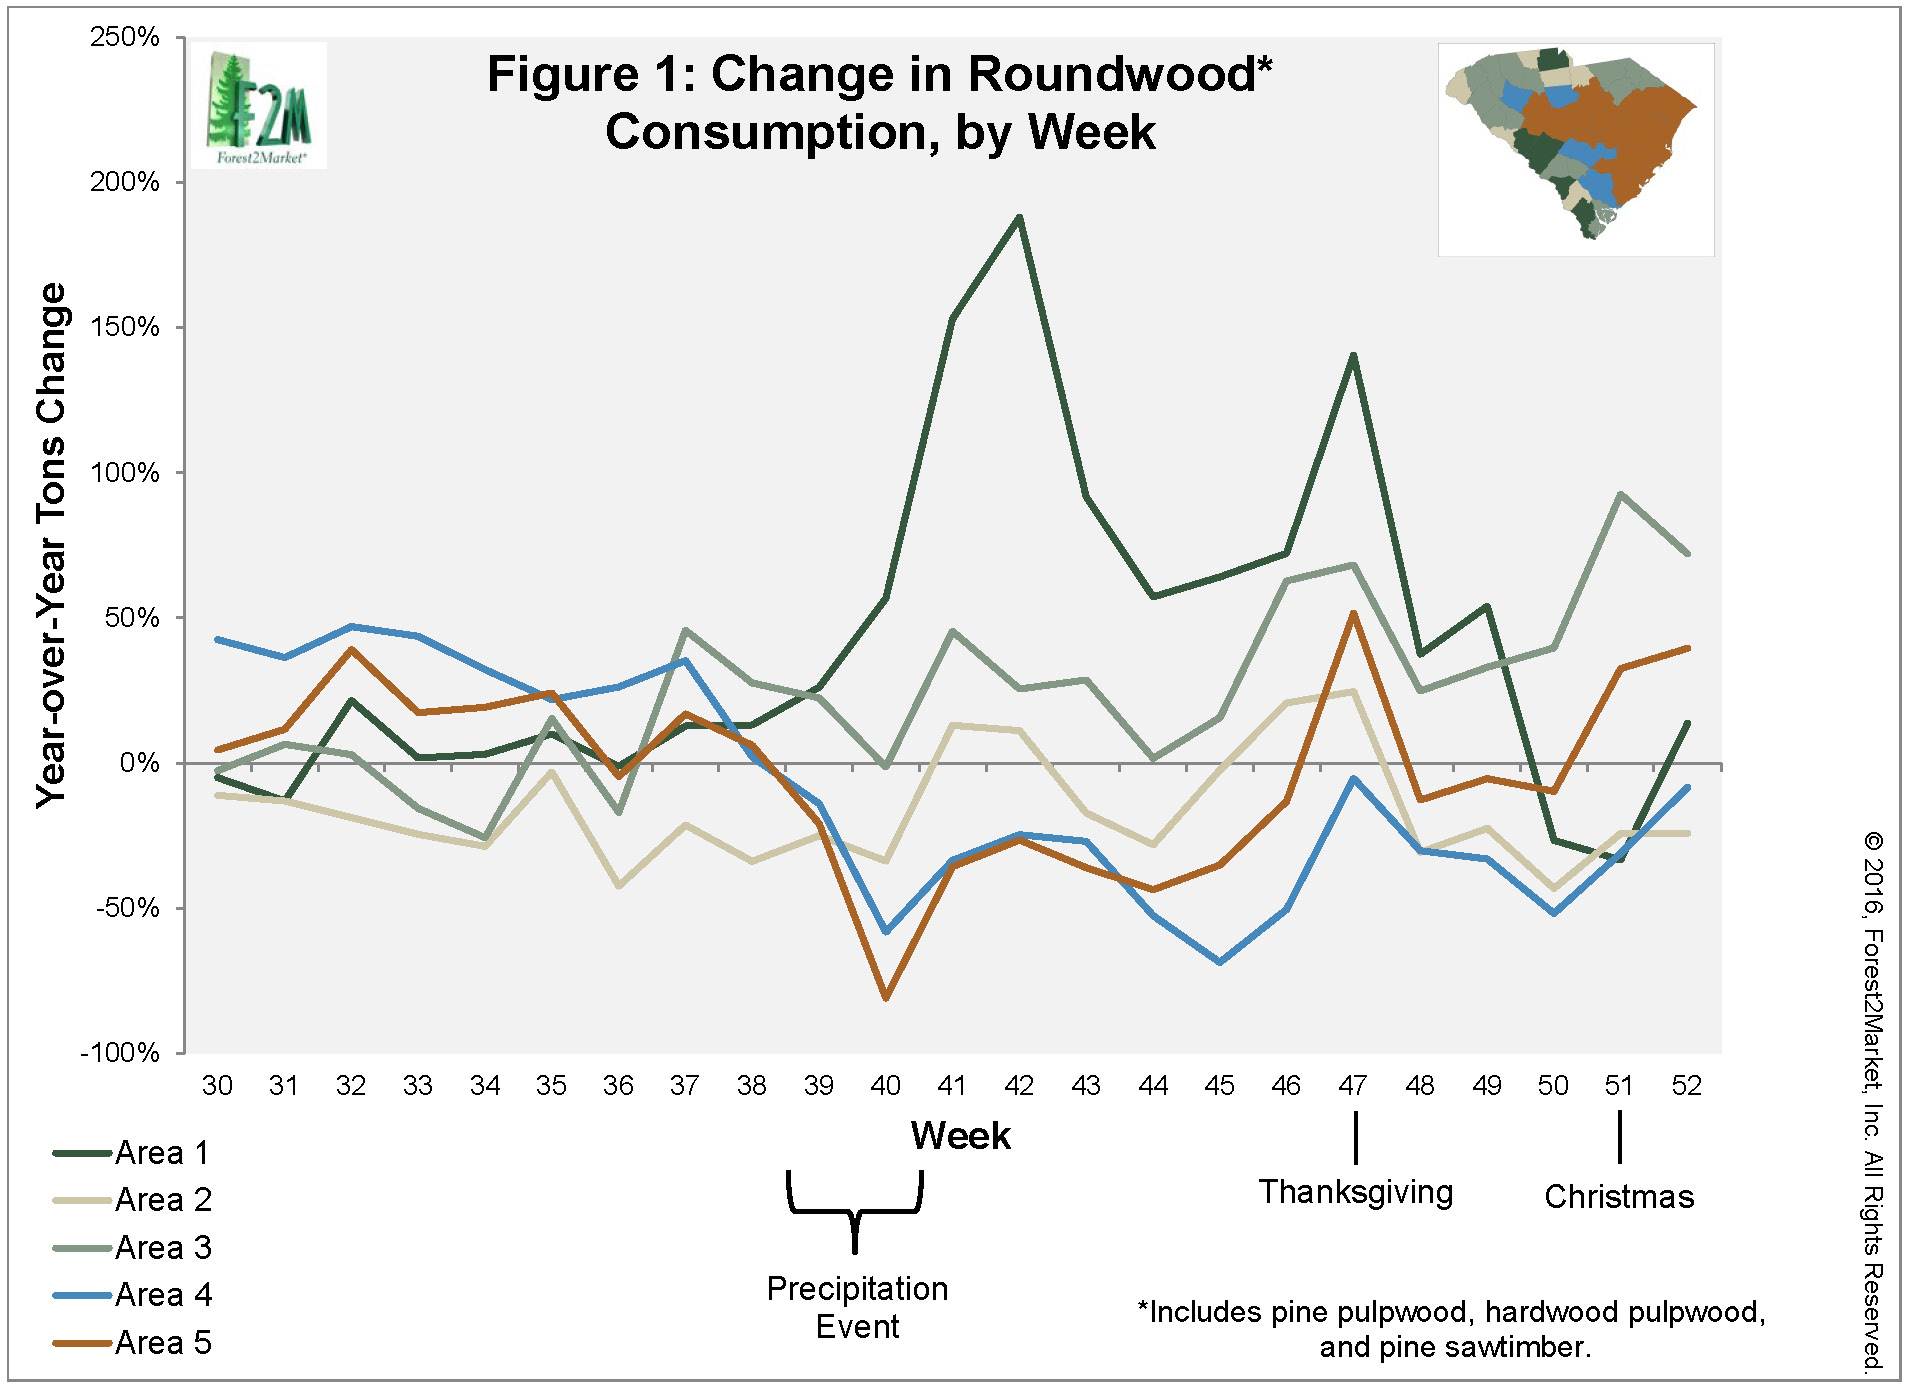 Precipitation Event Impacts: Shifts in Wood Supply & Procurement Patterns